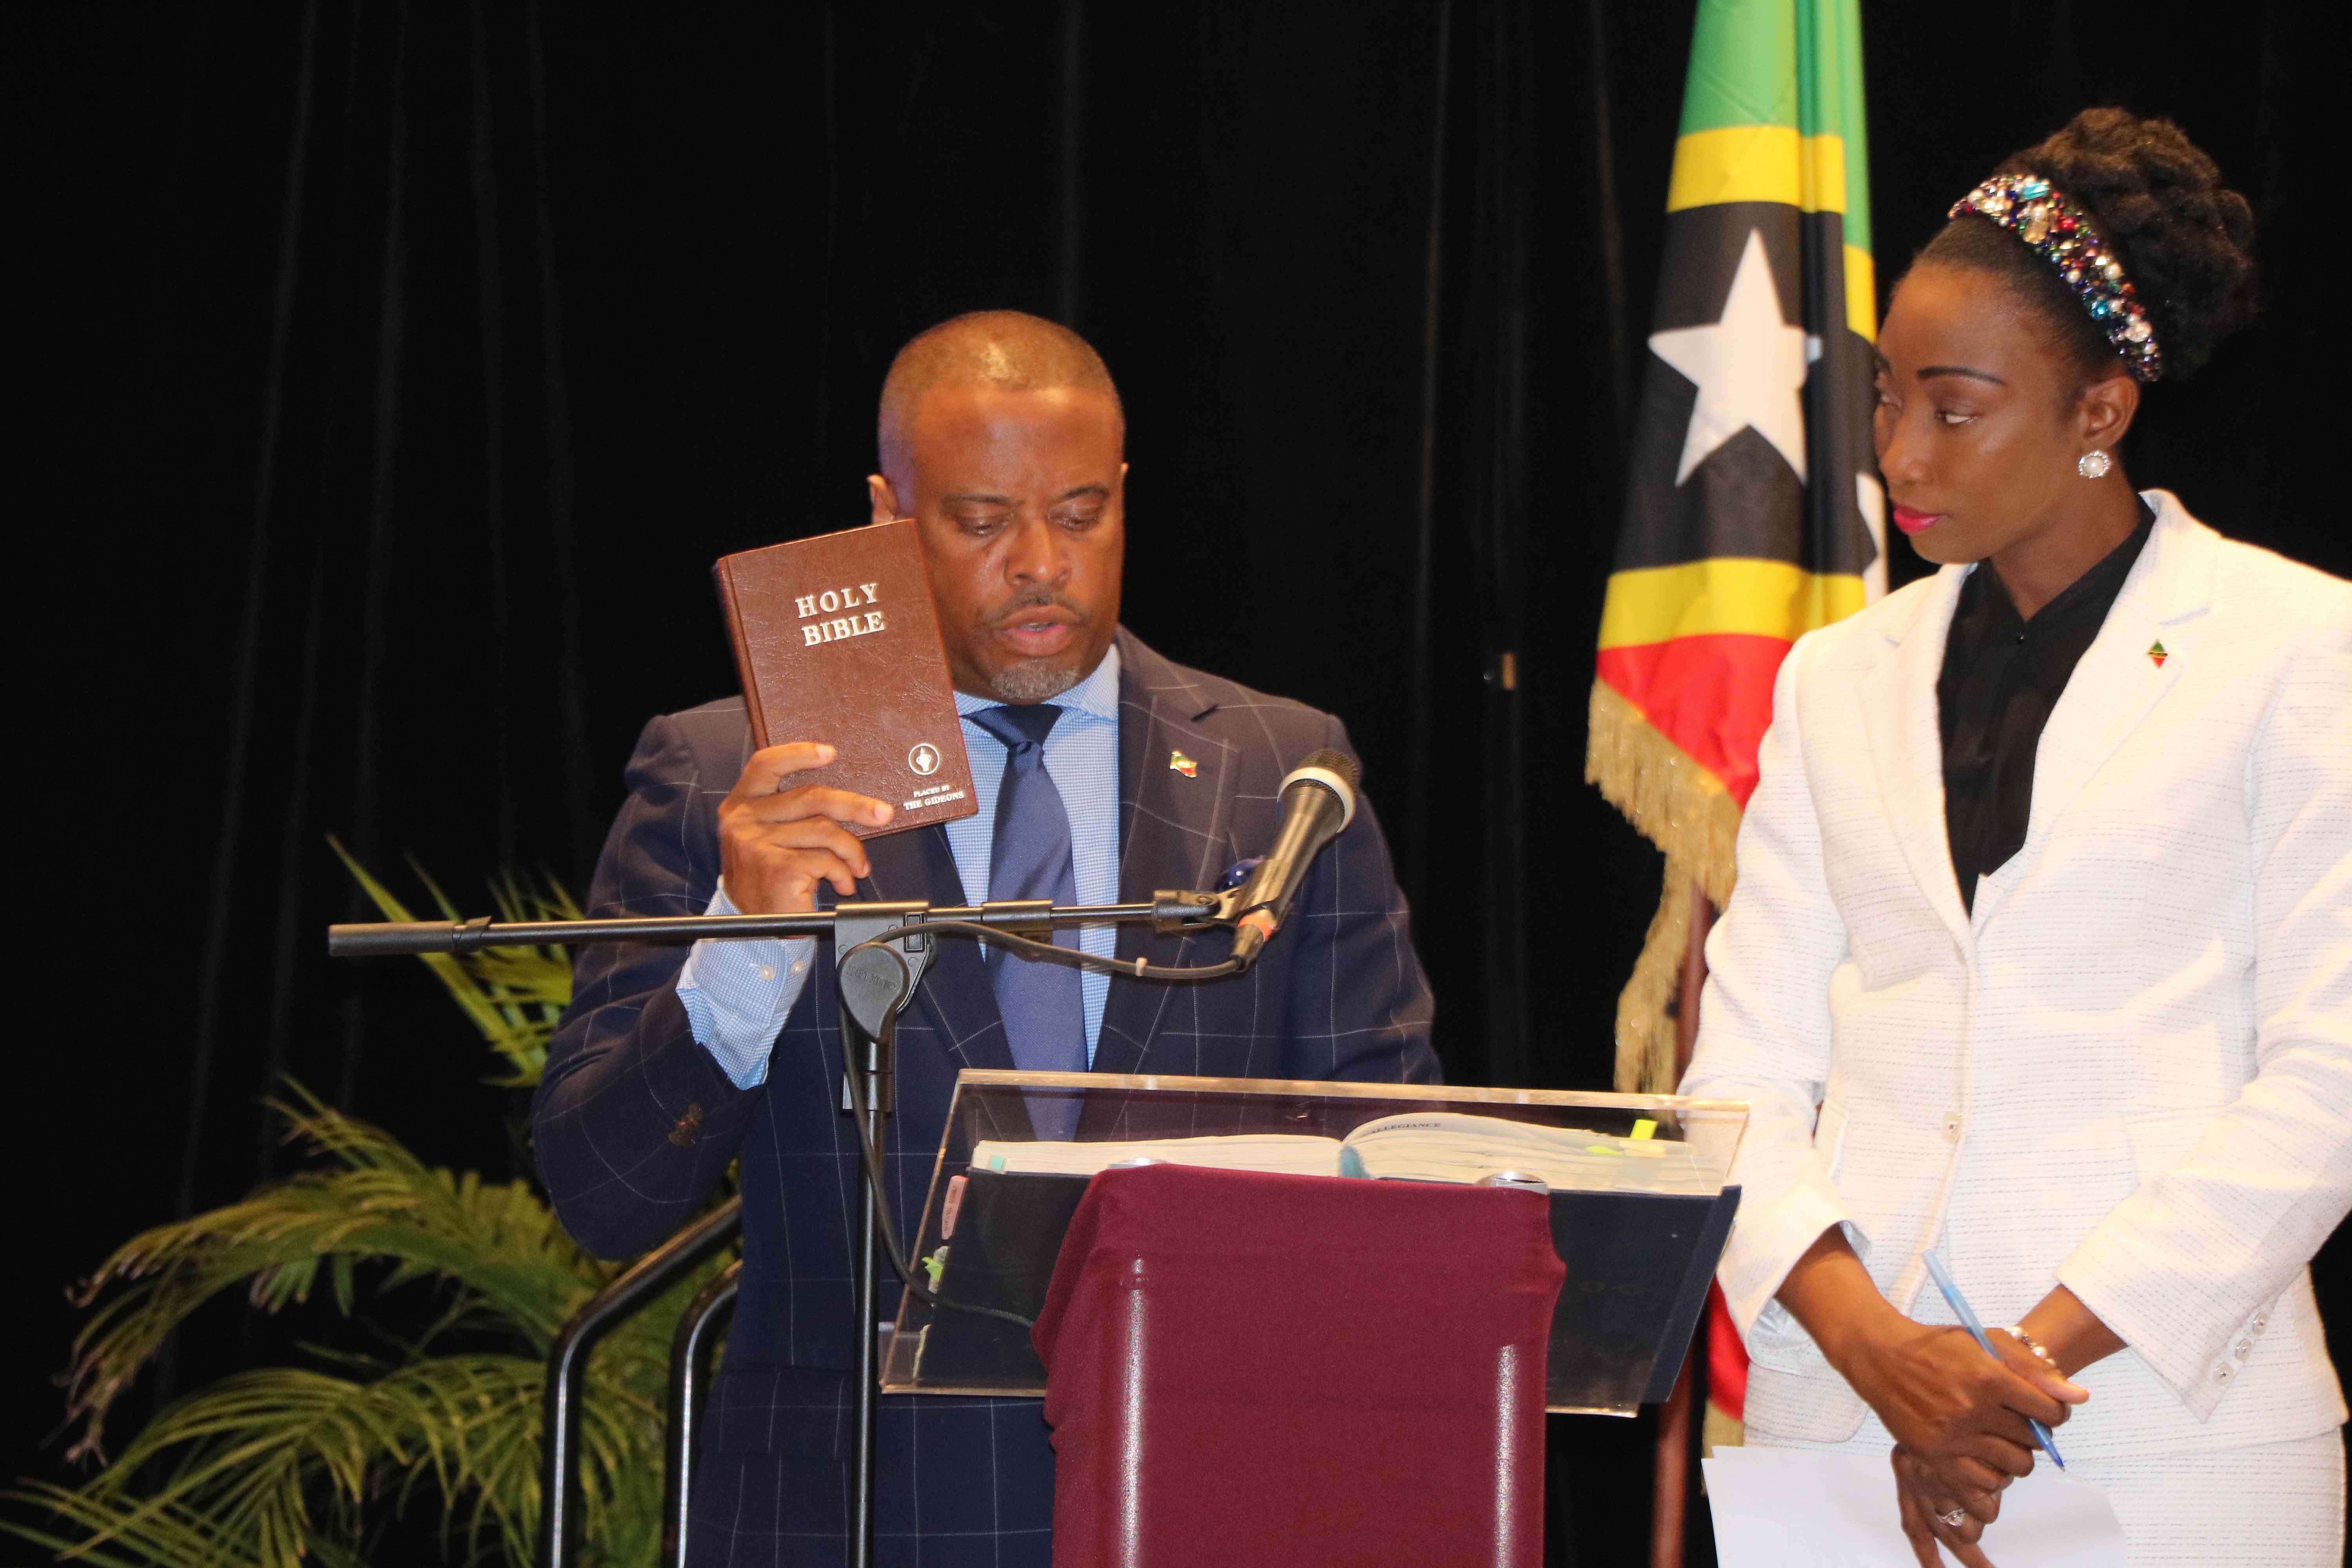 Hon. Mark Brantley, Member for Nevis 9 in the National Assembly, taking the Oath of Allegiance at the Opening of the National Assembly at the St. Kitts Marriott Resort on July 08, 2020, while Mrs. Sonia Boddie-Thompson, Clerk of the National Assembly looks on